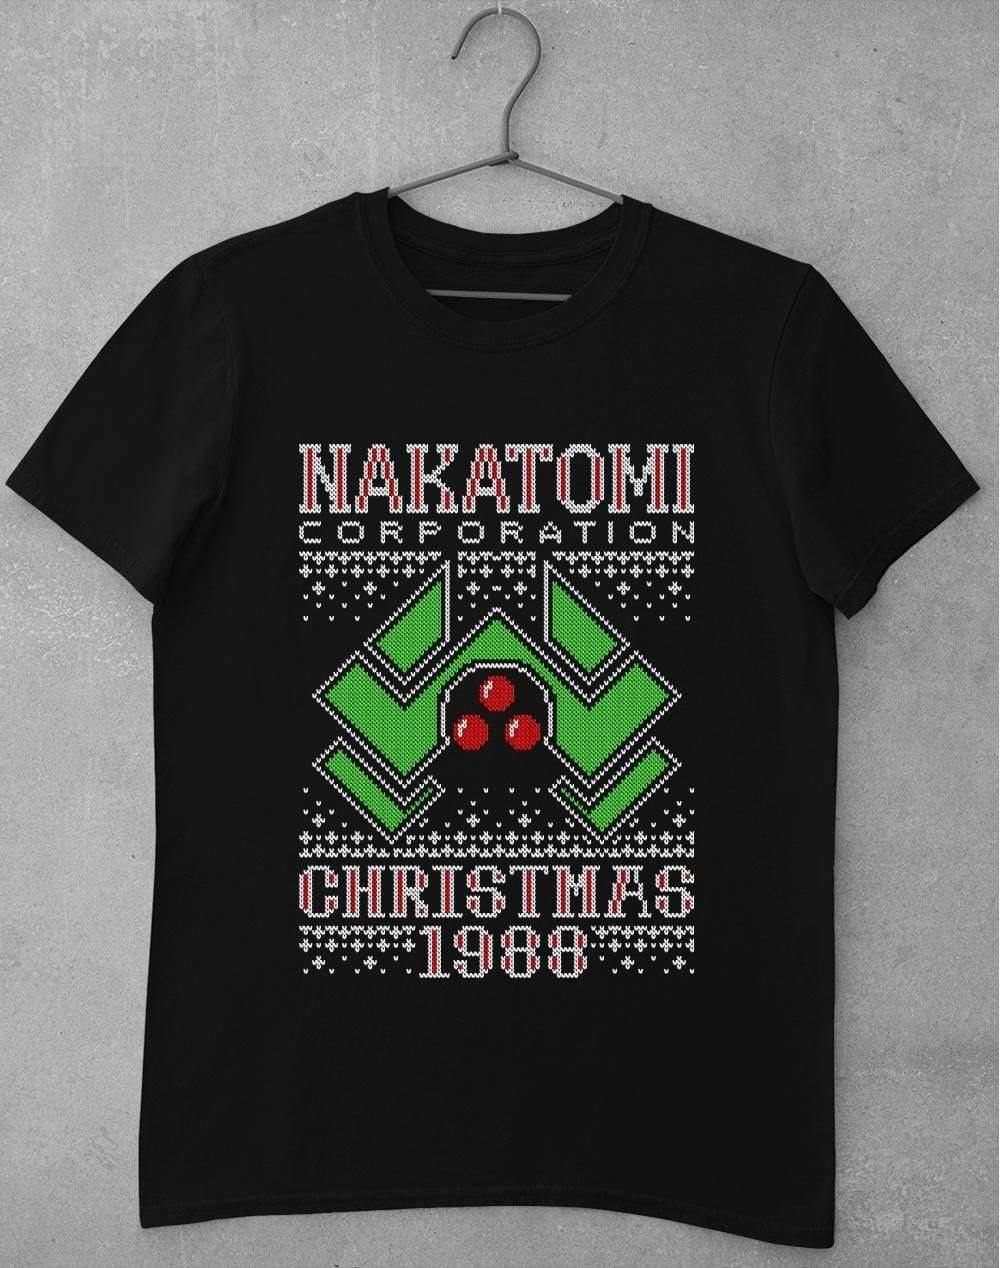 Nakatomi Christmas 1988 Knitted-Look T-Shirt S / Black  - Off World Tees